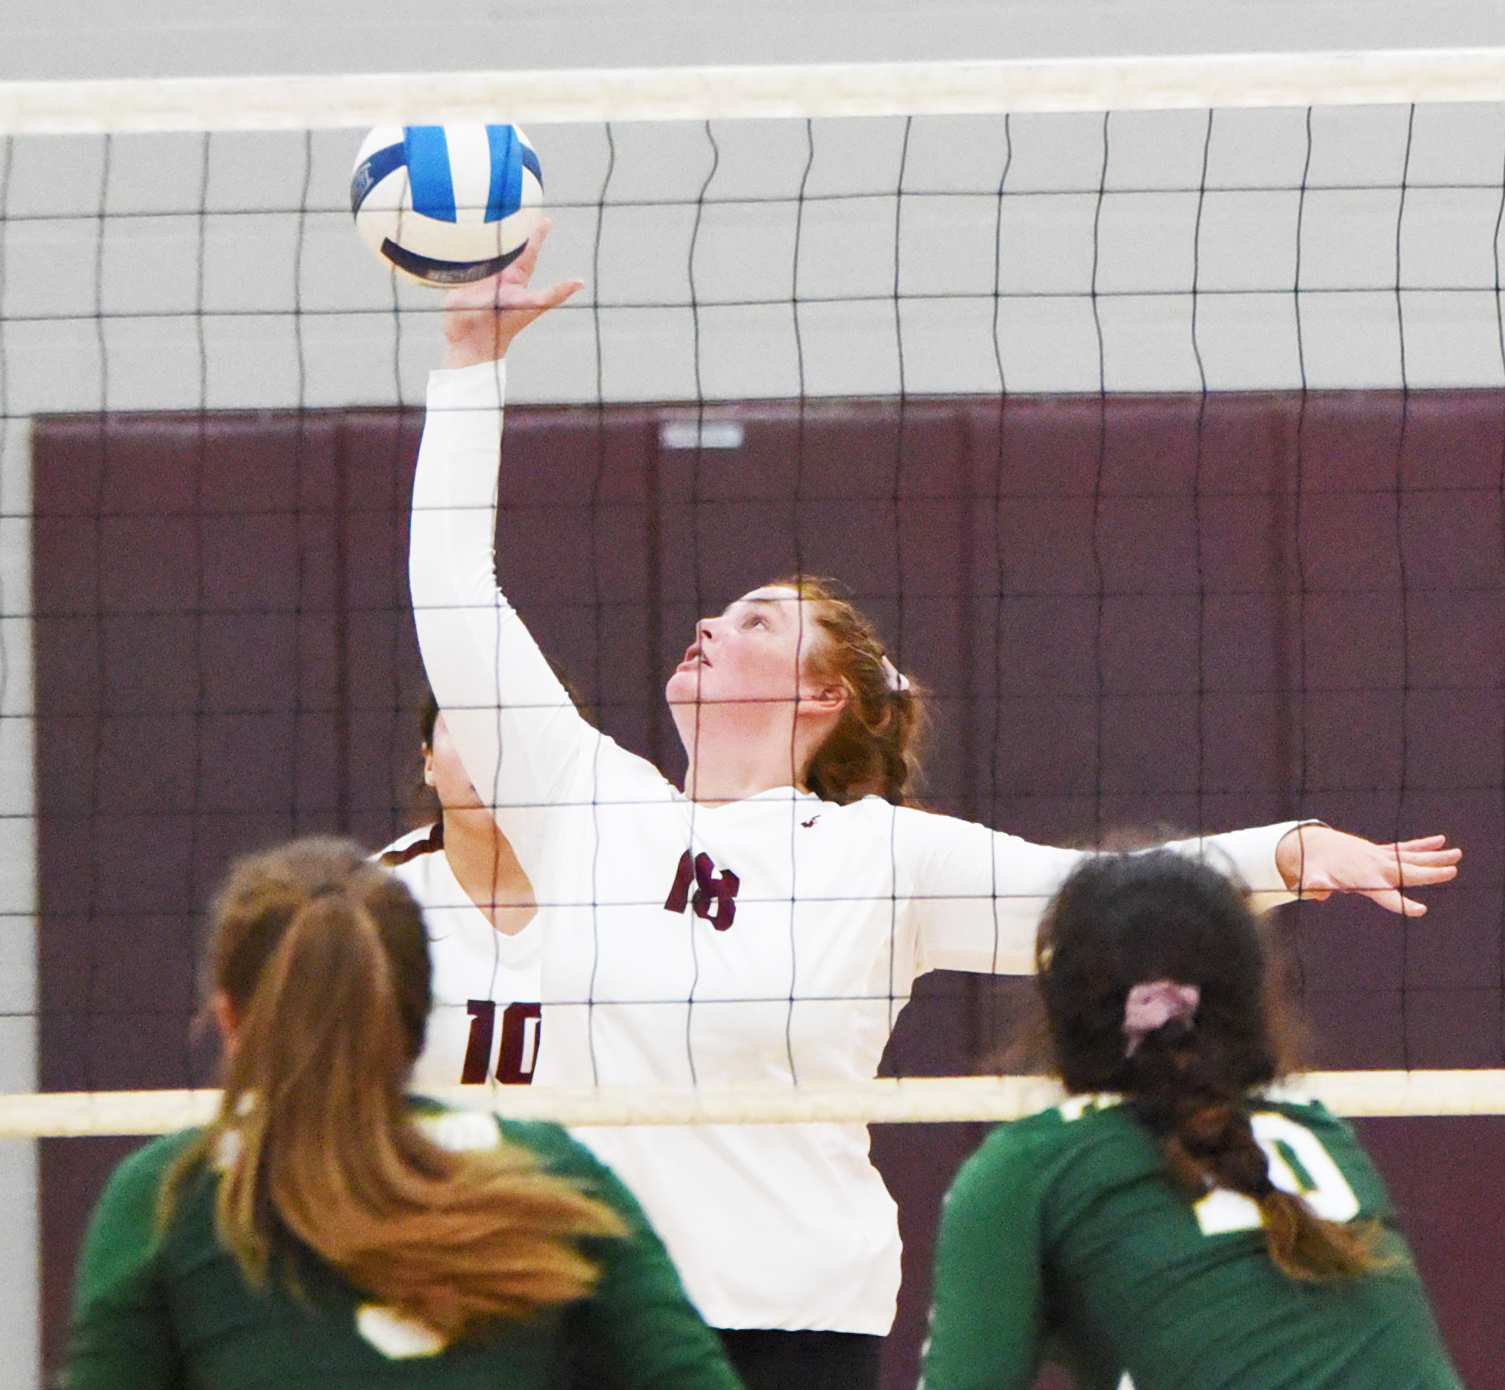 Ryndee Weishuhn led Victoria College with eight kills against Wharton County Junior College.